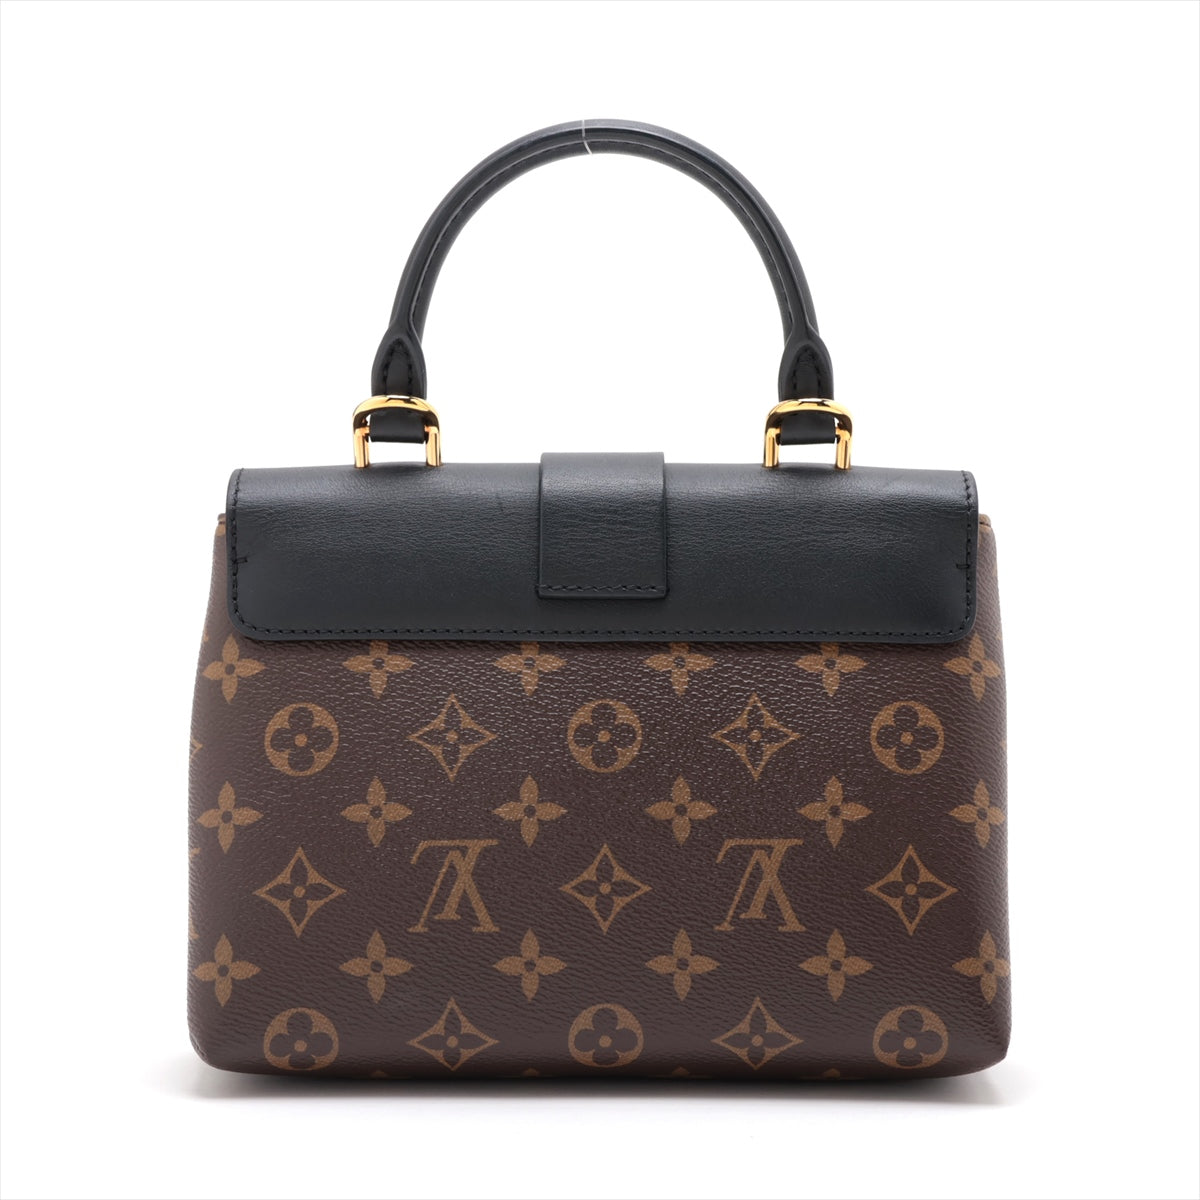 Louis Vuitton Monogram Rocky BB M44141 There was an RFID response